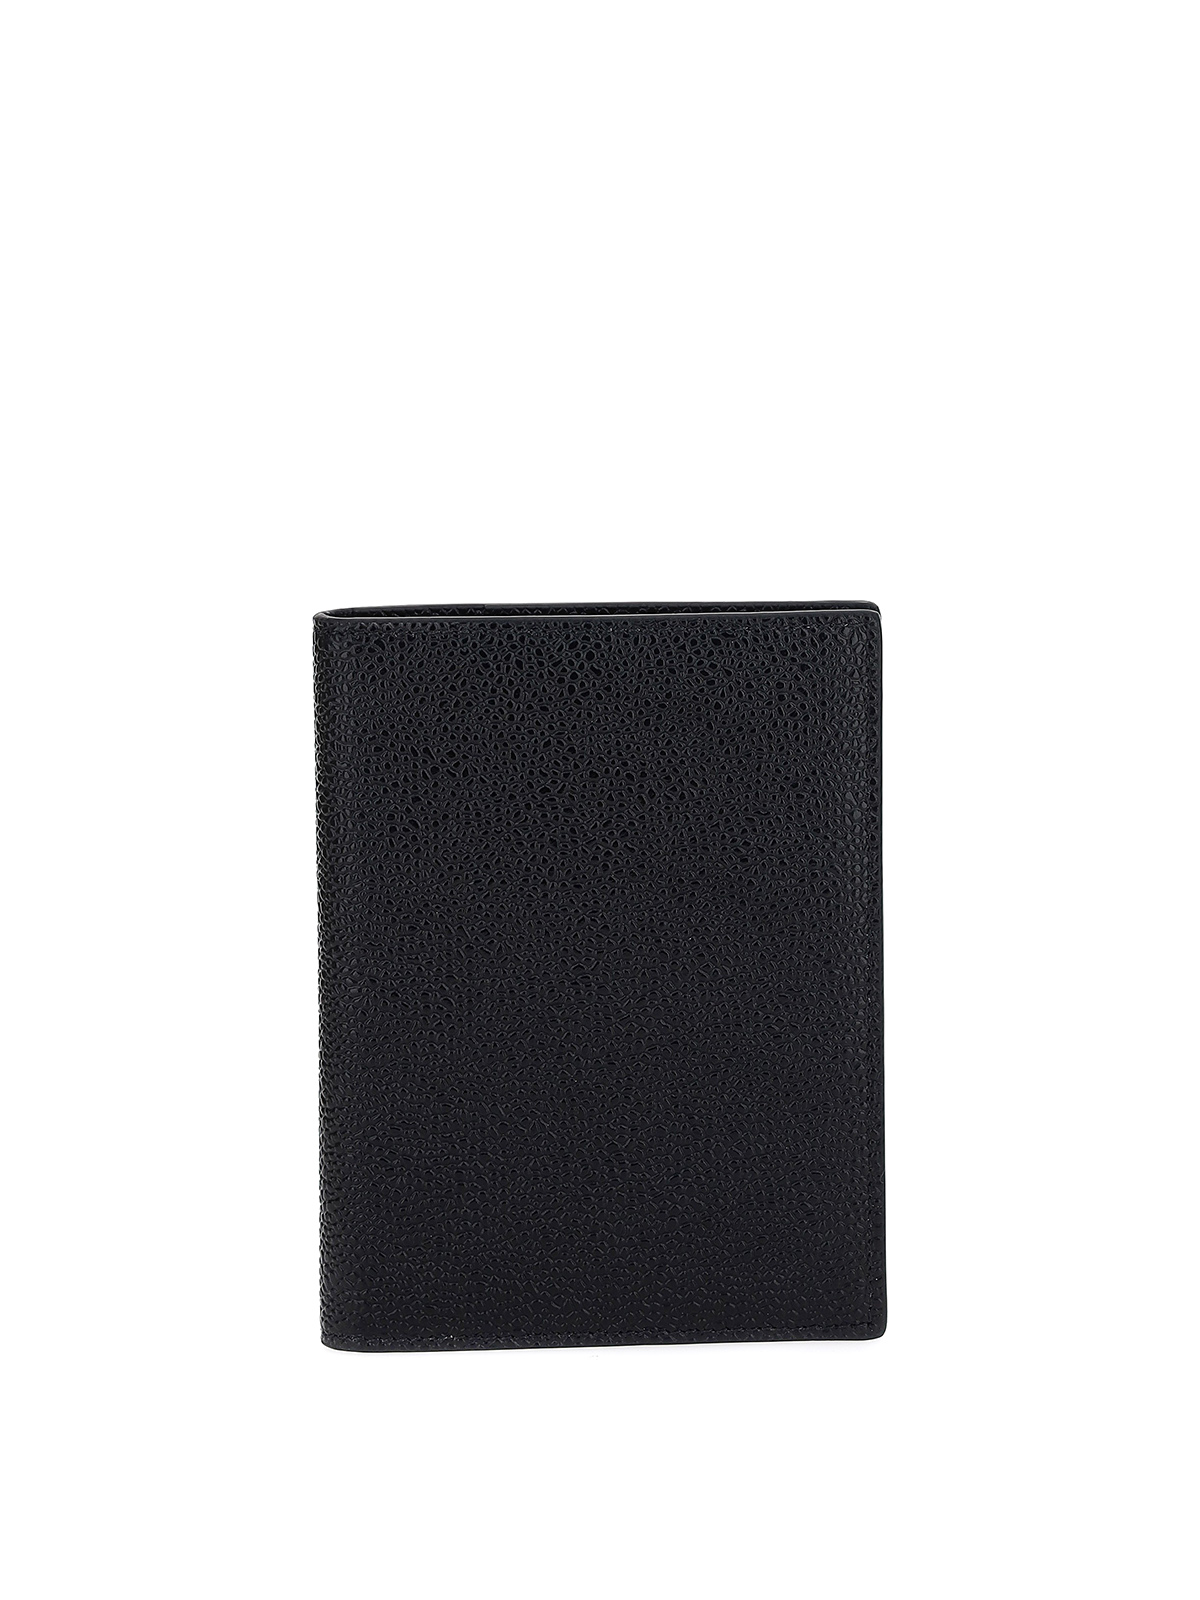 Thom Browne Grained Leather Passport Holder In Negro